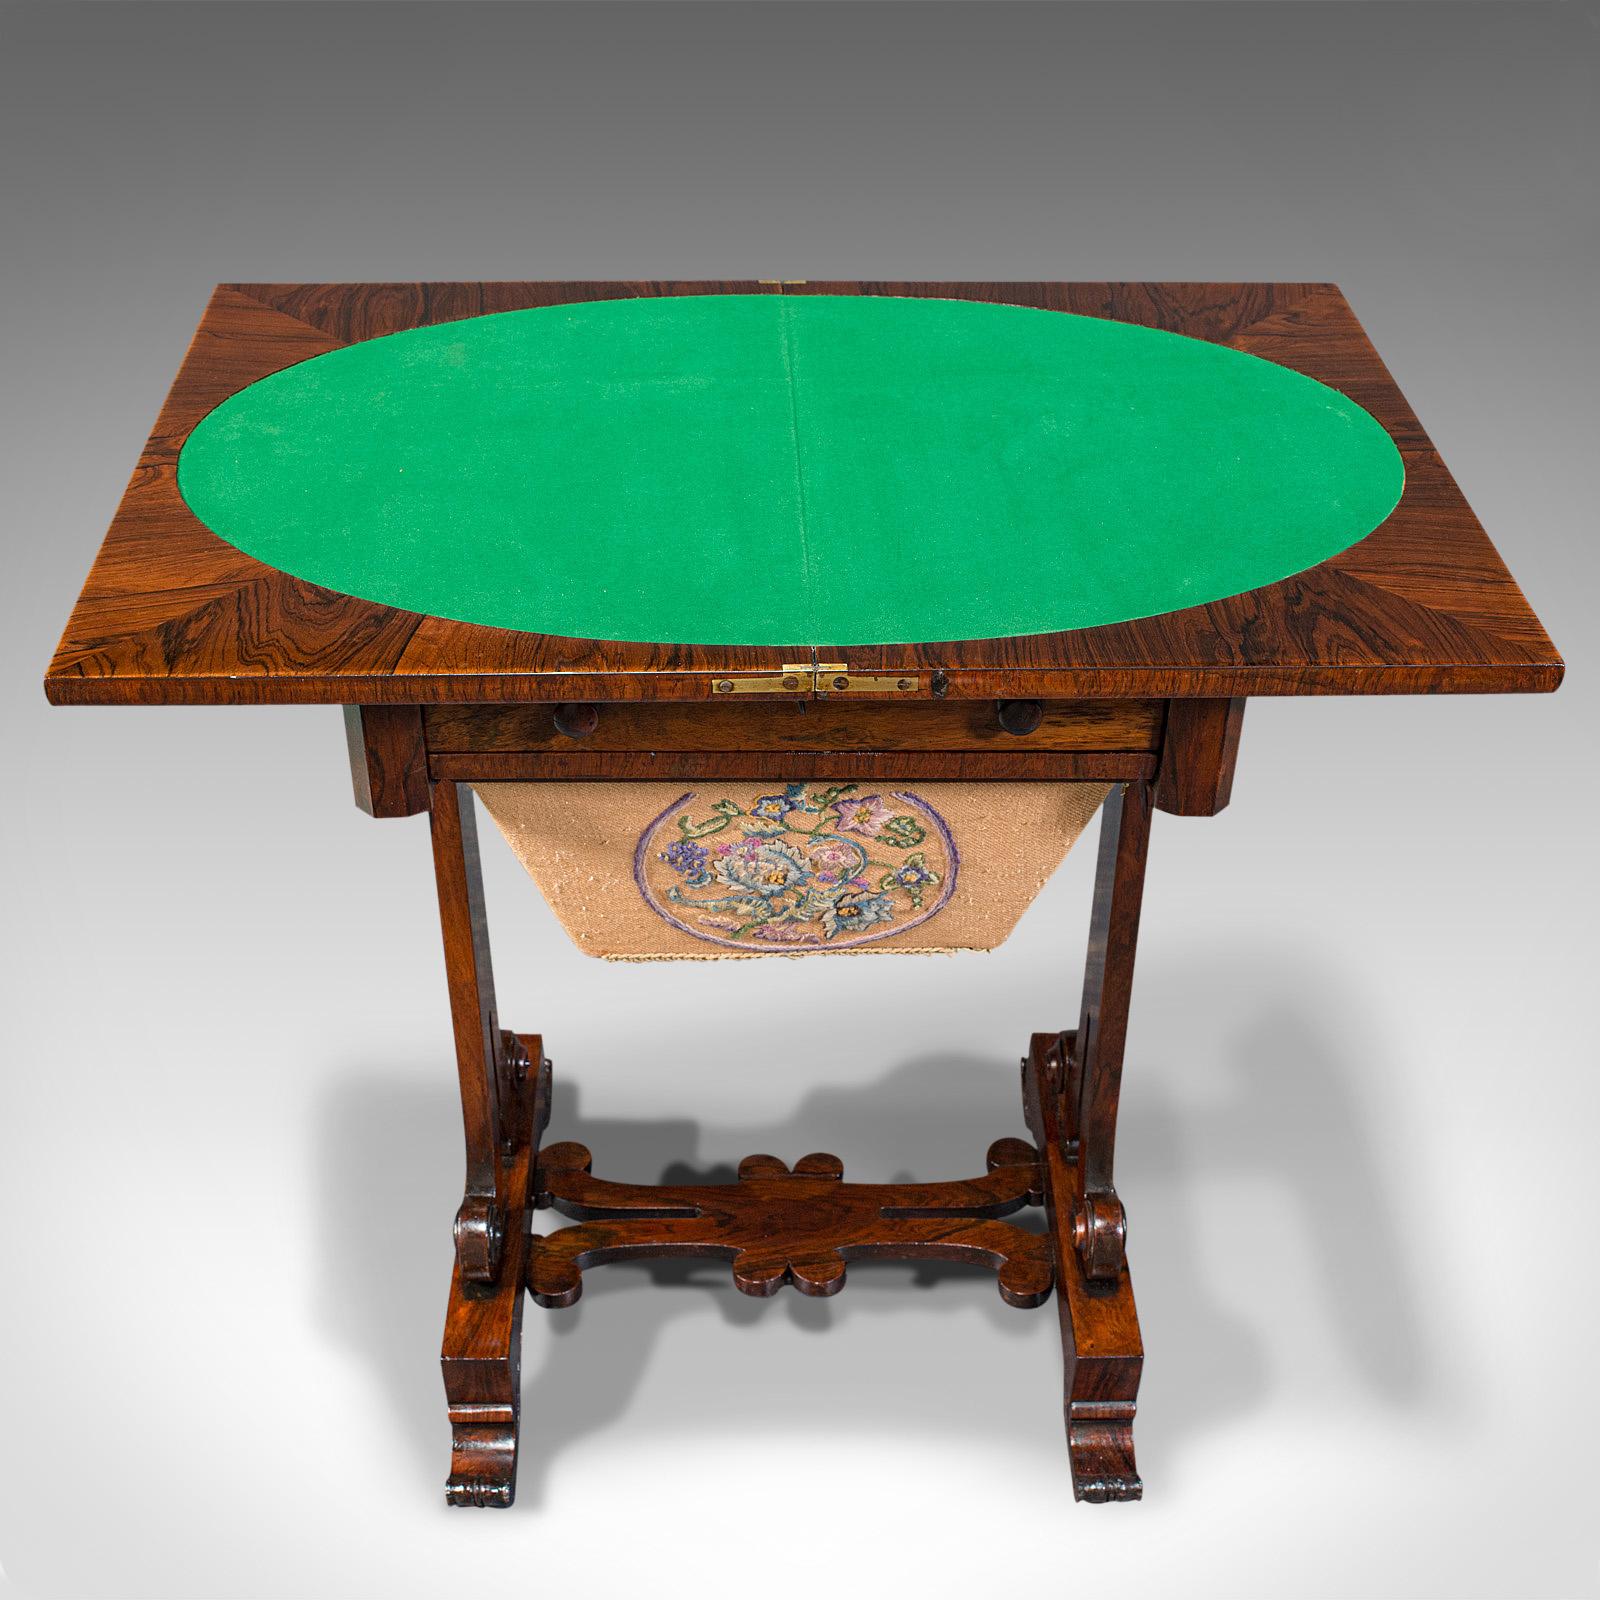 Antique Fold Over Games Table, English, Rosewood, Chess, Cards, Regency, C.1820 For Sale 2